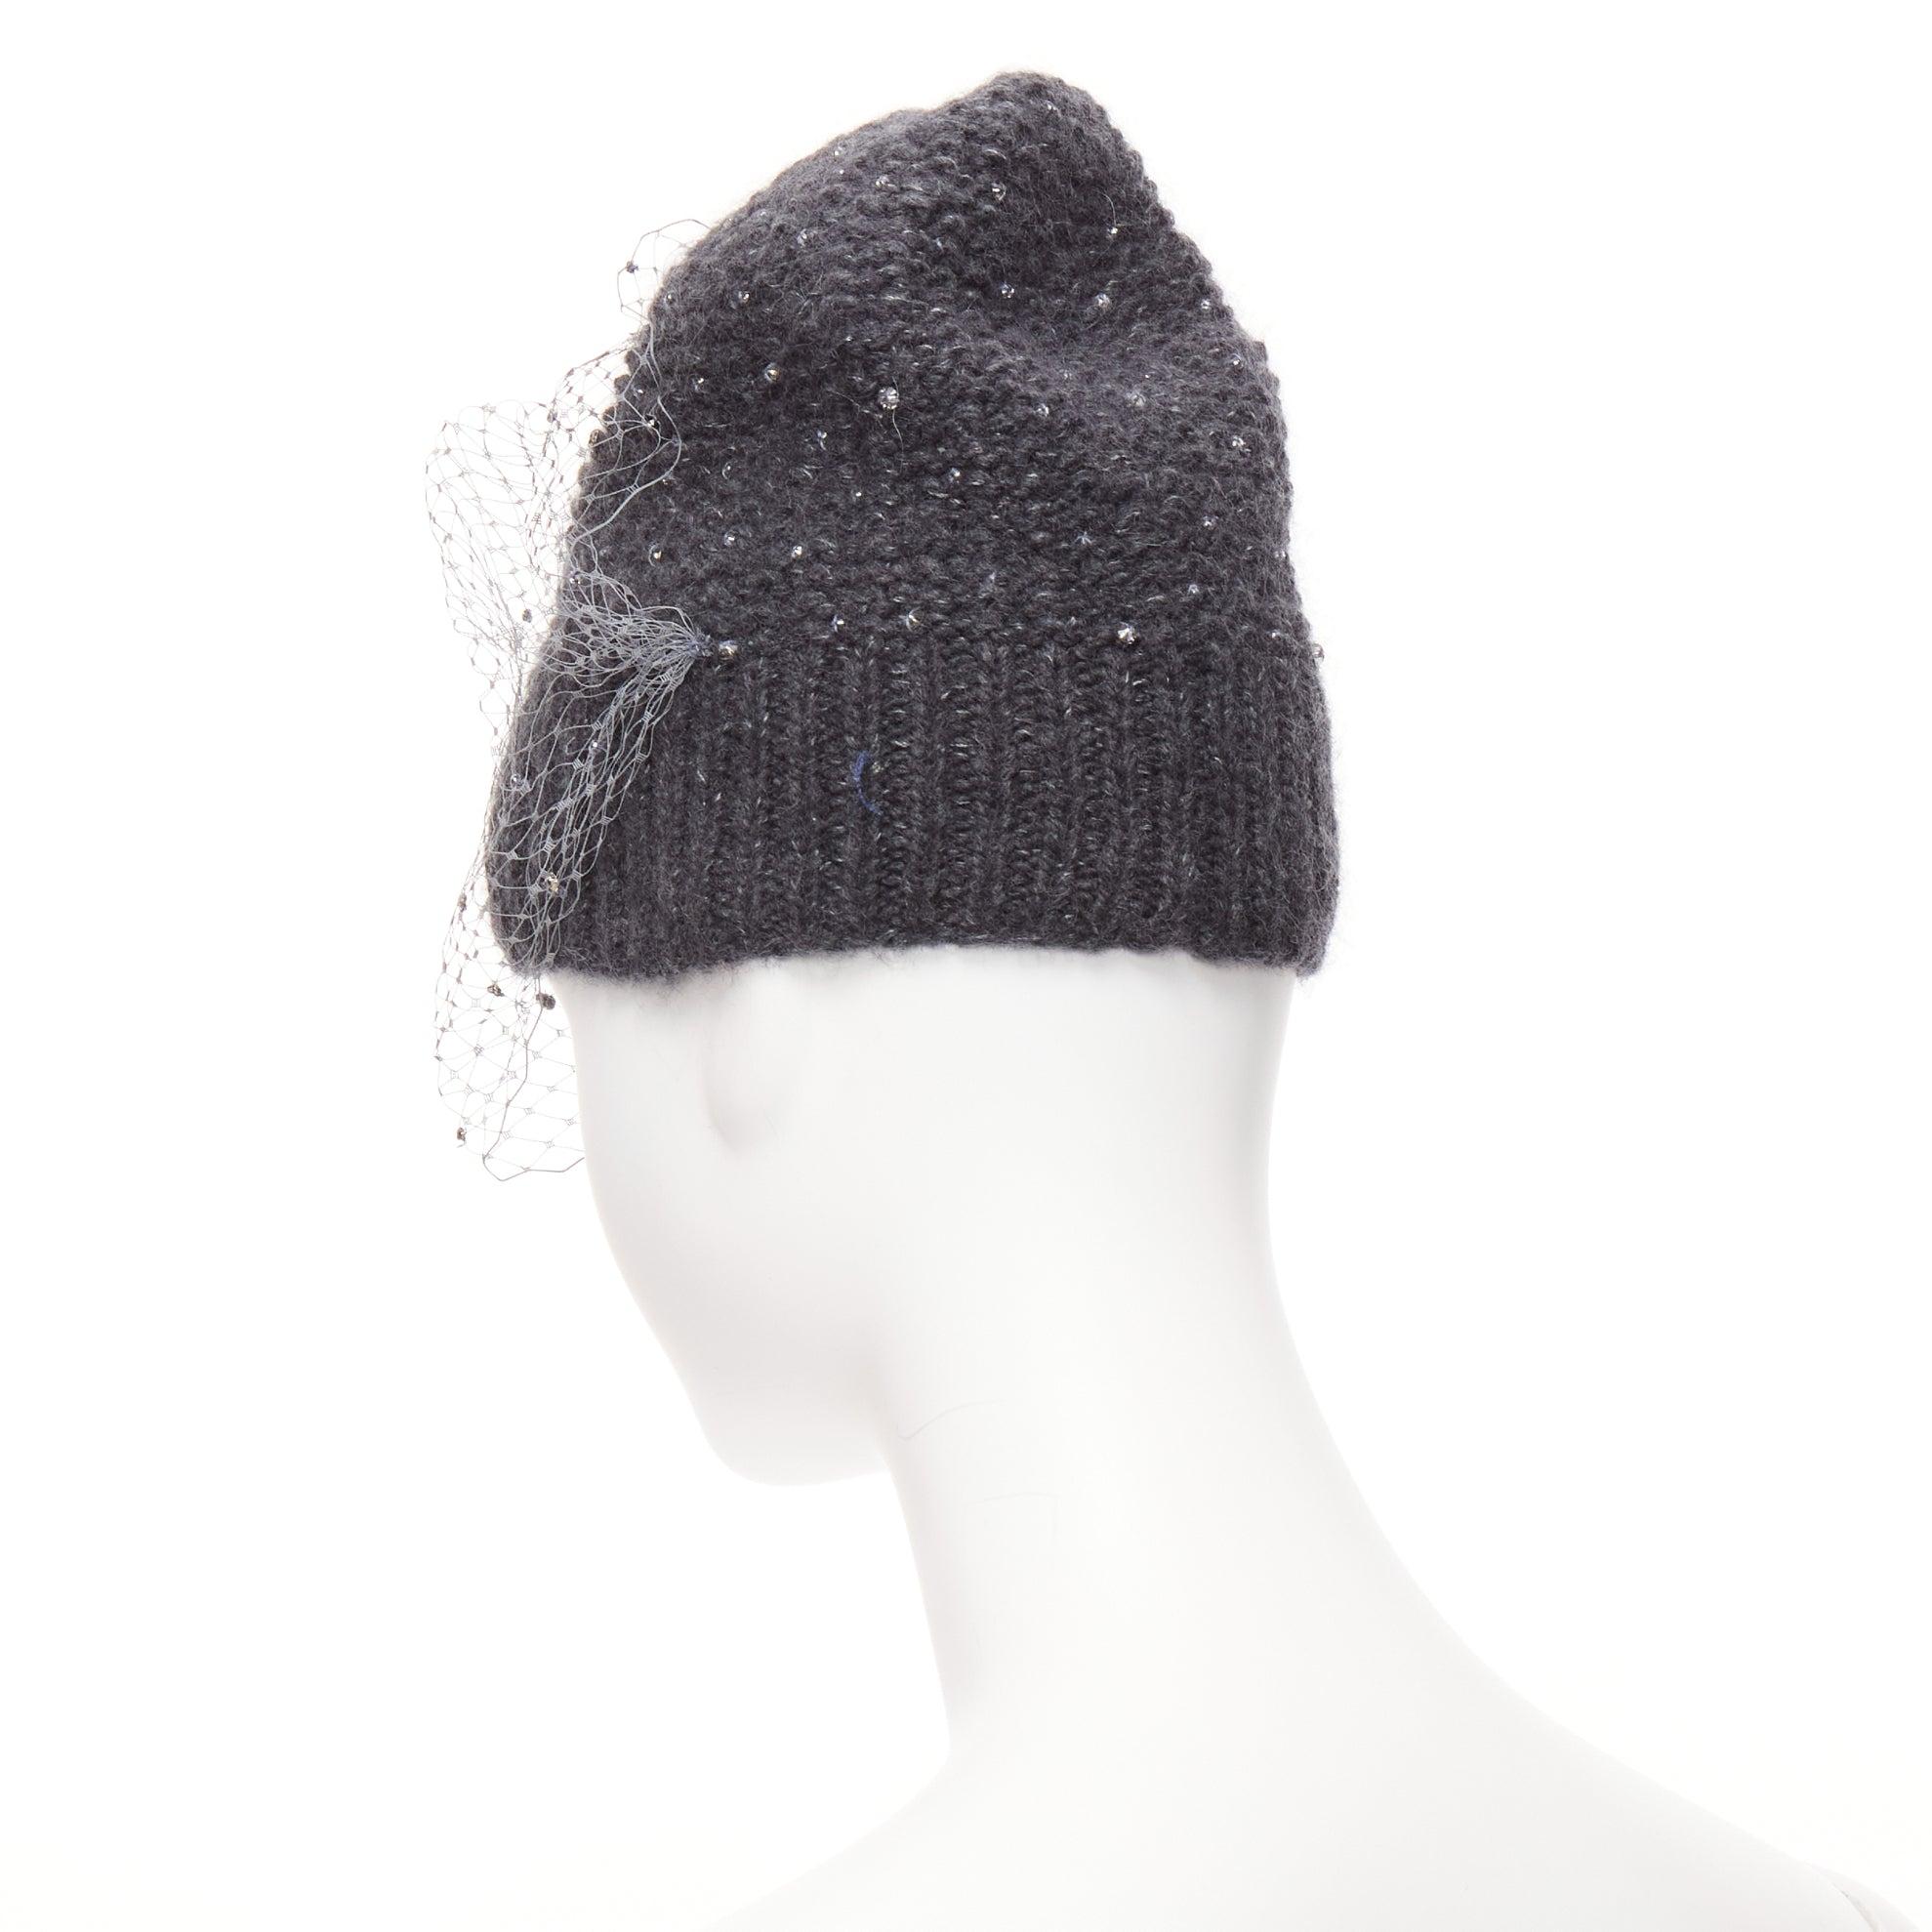 JENNIFER BEHR grey charcoal crystal beads veil round top beanie hat For Sale 2